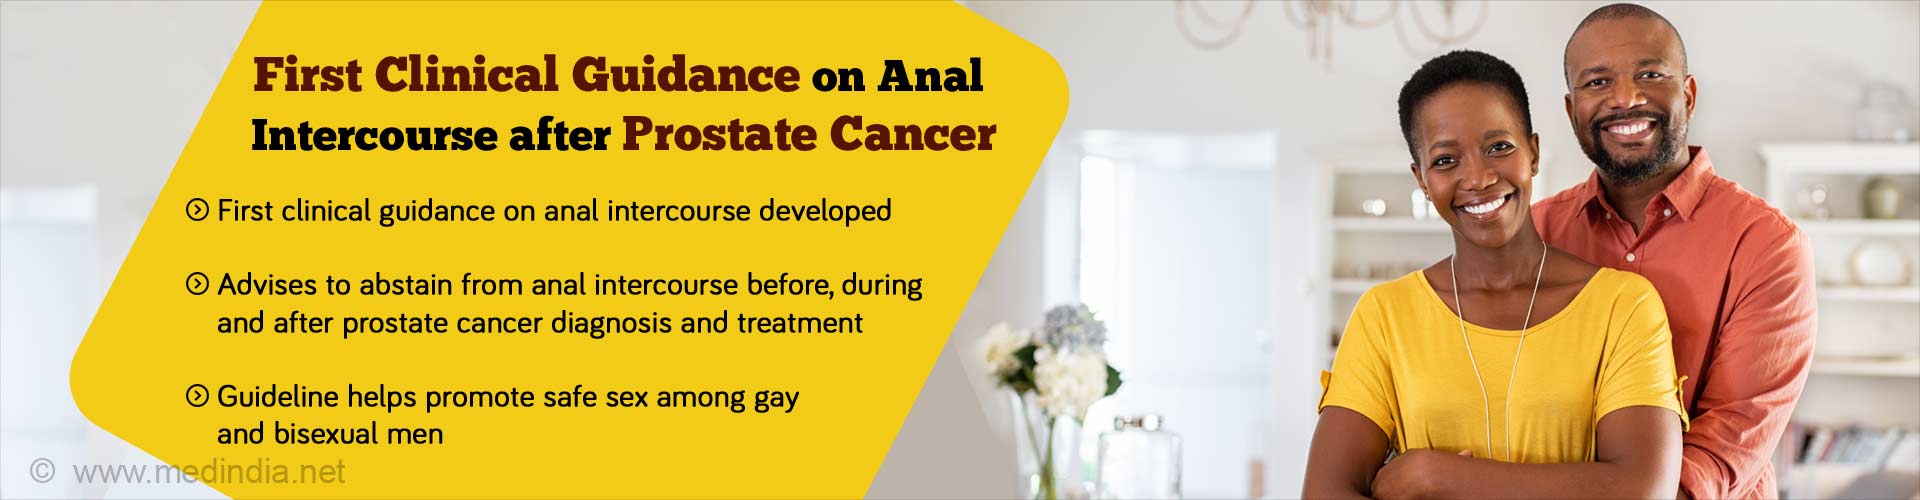 First clinical guidance on anal intercourse after prostate cancer. First clinical guidance on anal intercourse developed. Advises to abstain from anal intercourse before, during and after prostate cancer diagnosis and treatment. Guideline helps promote safe sex among gay and bisexual men. 